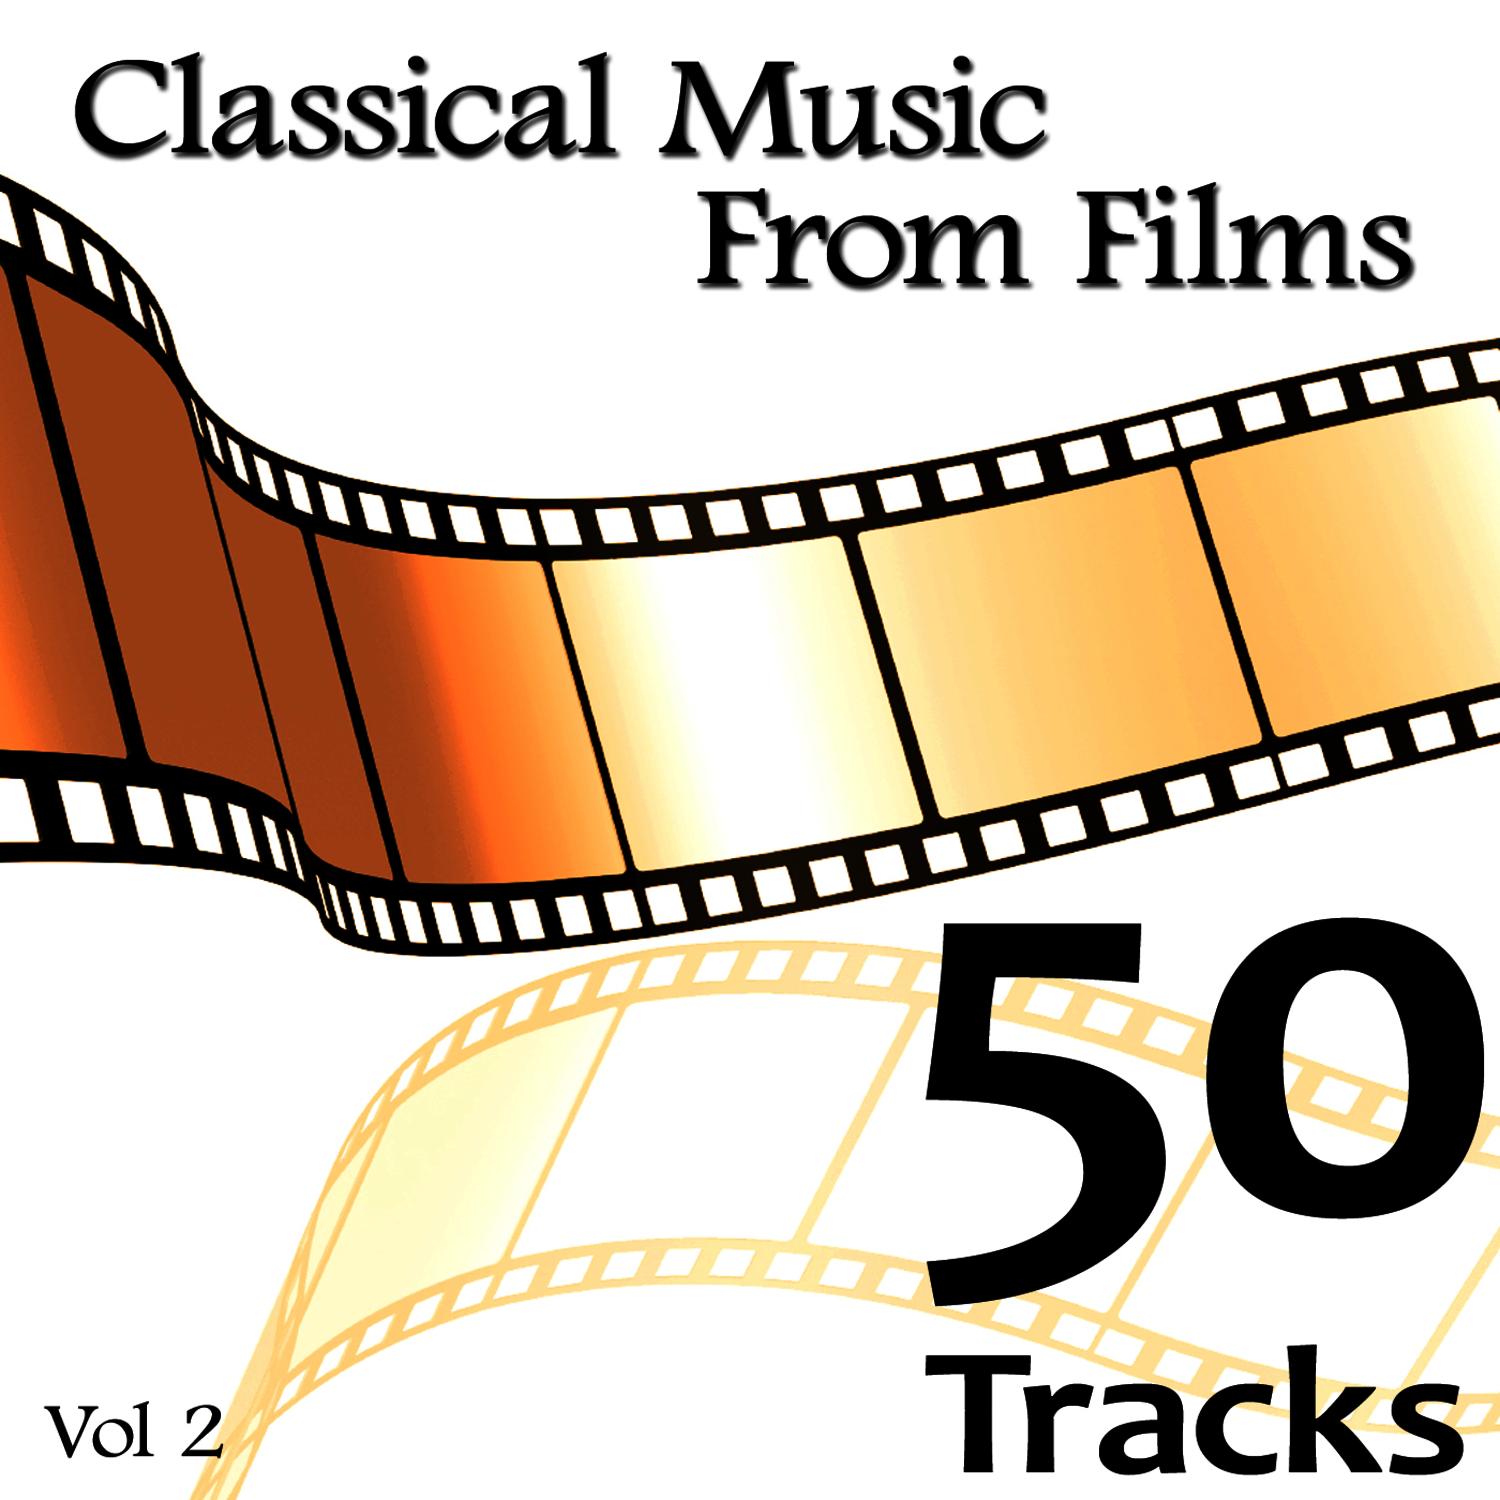 Classical Music from Films Vol. 2 (1990-2008)